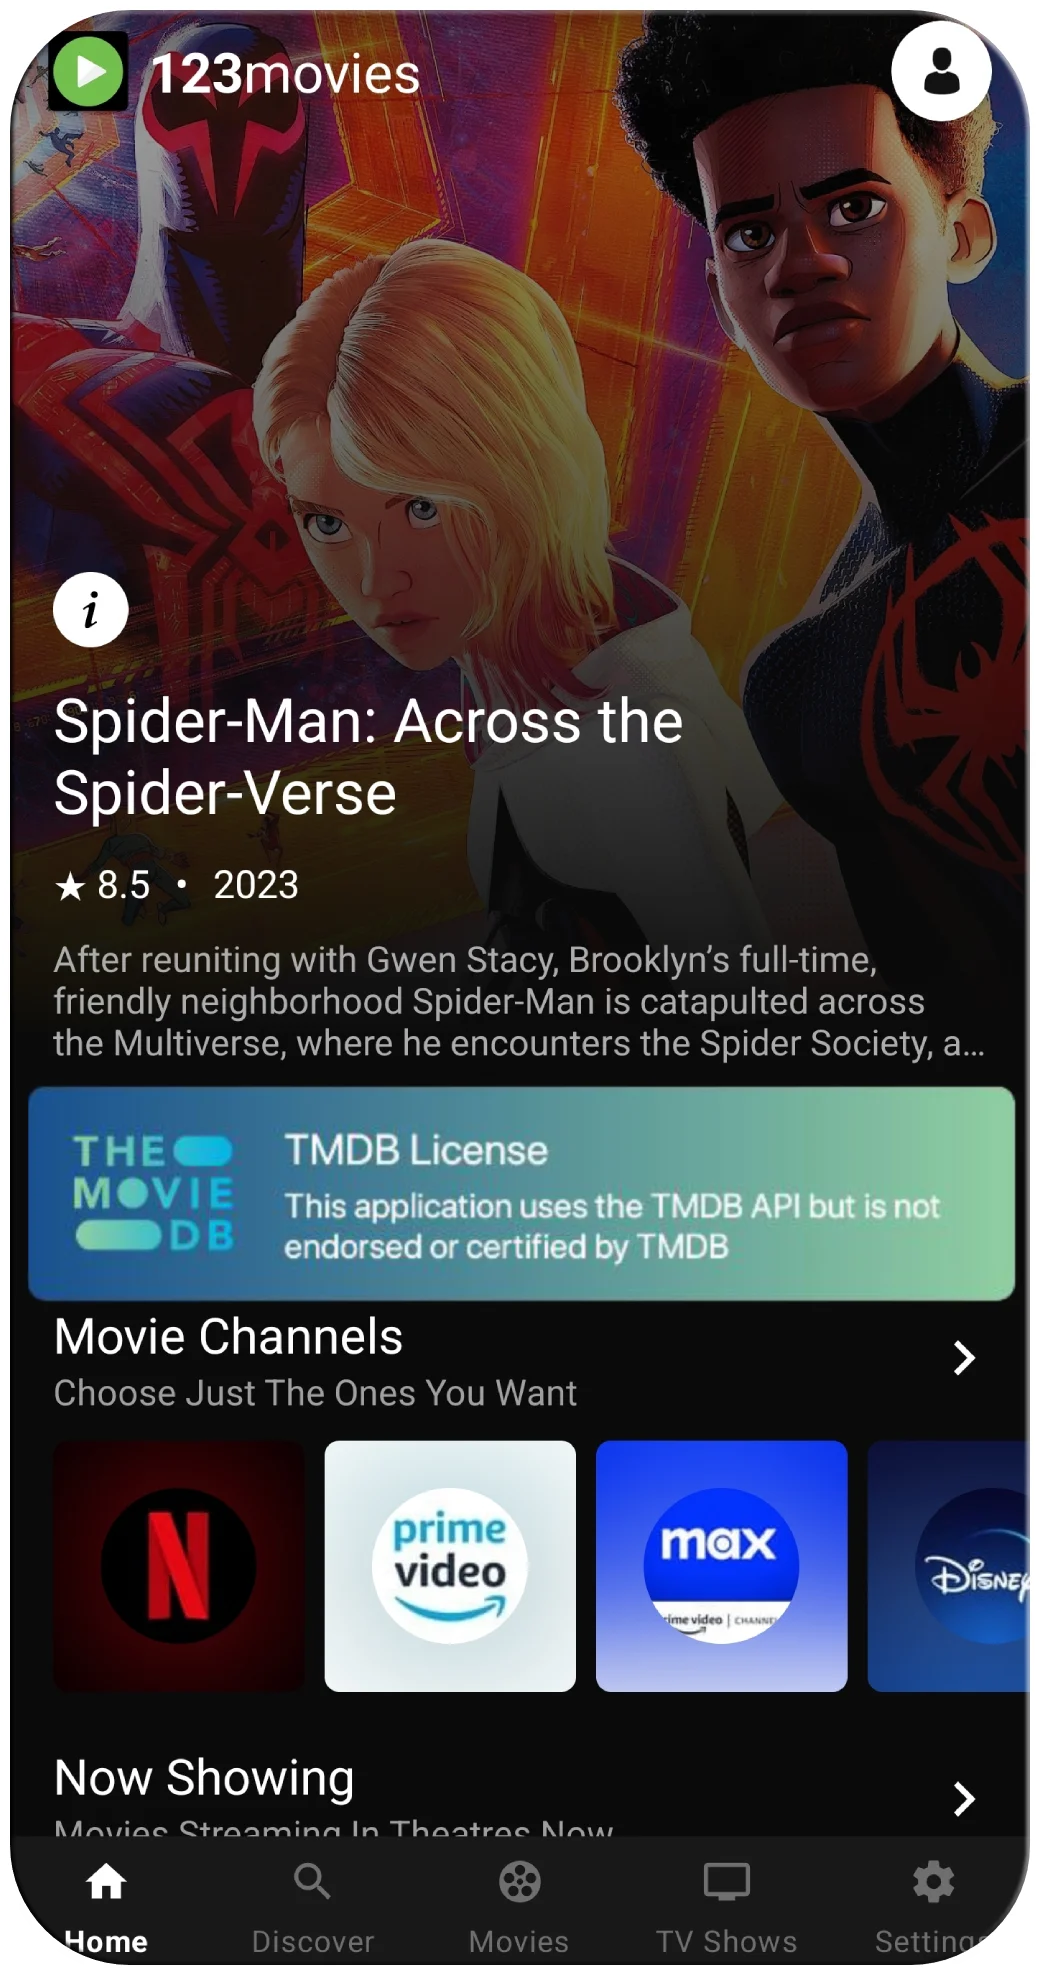 123movies App Features